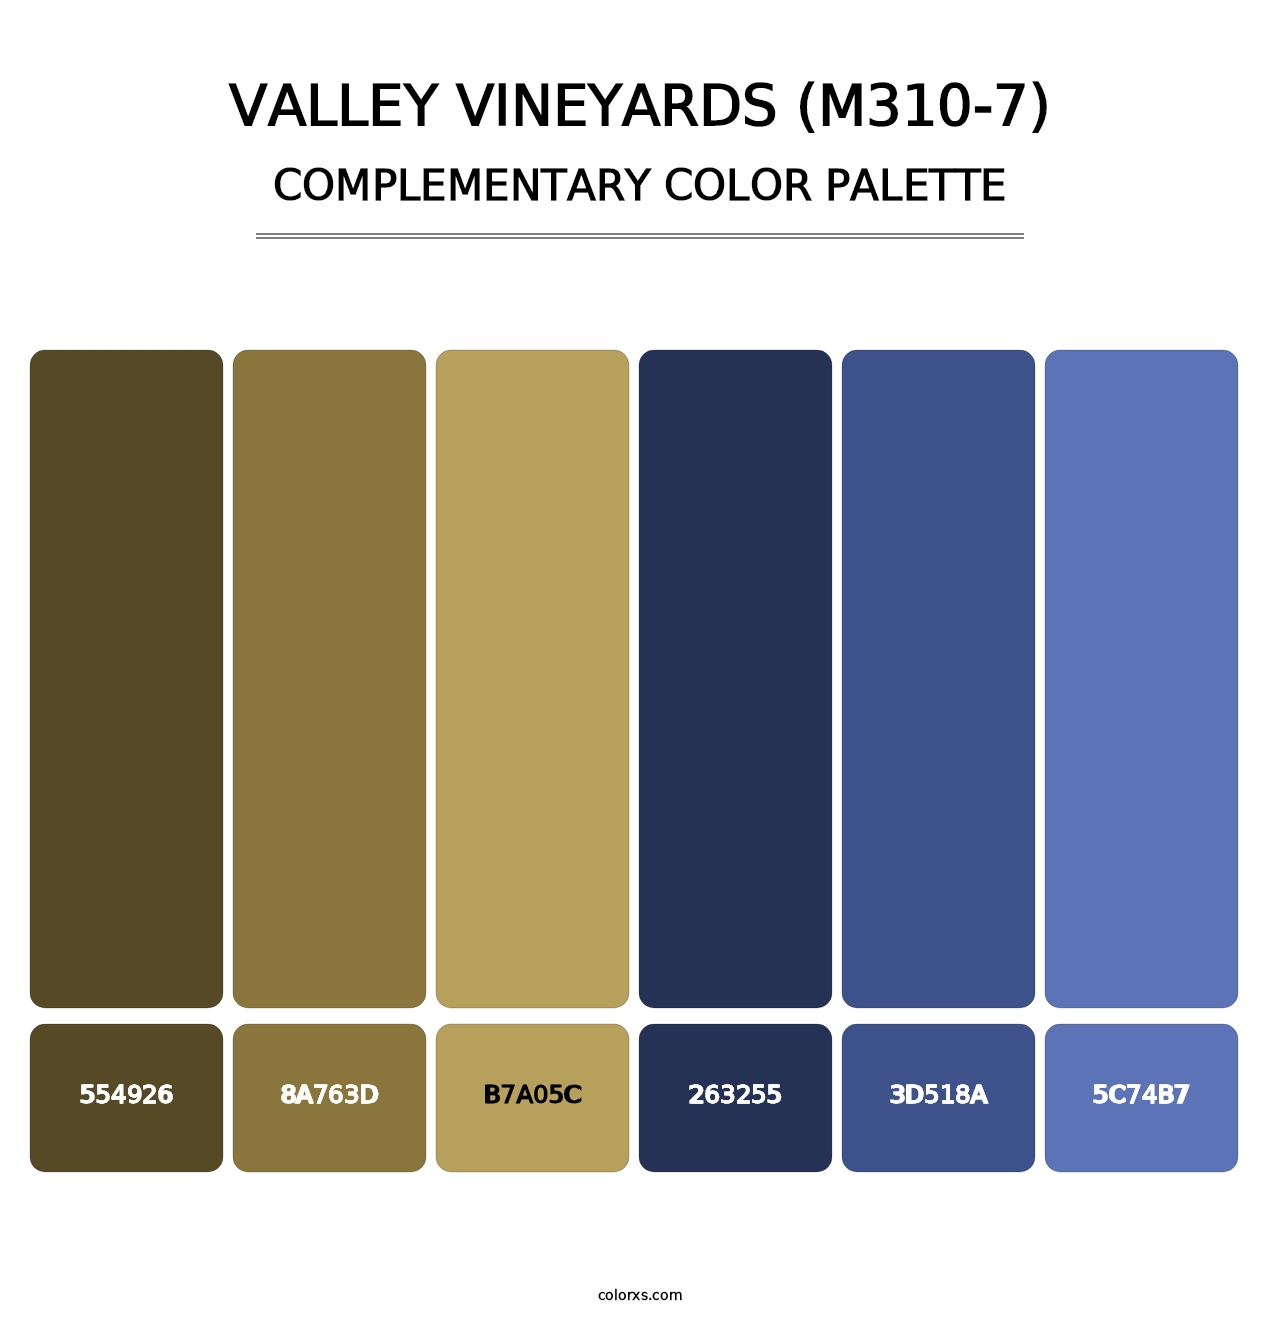 Valley Vineyards (M310-7) - Complementary Color Palette